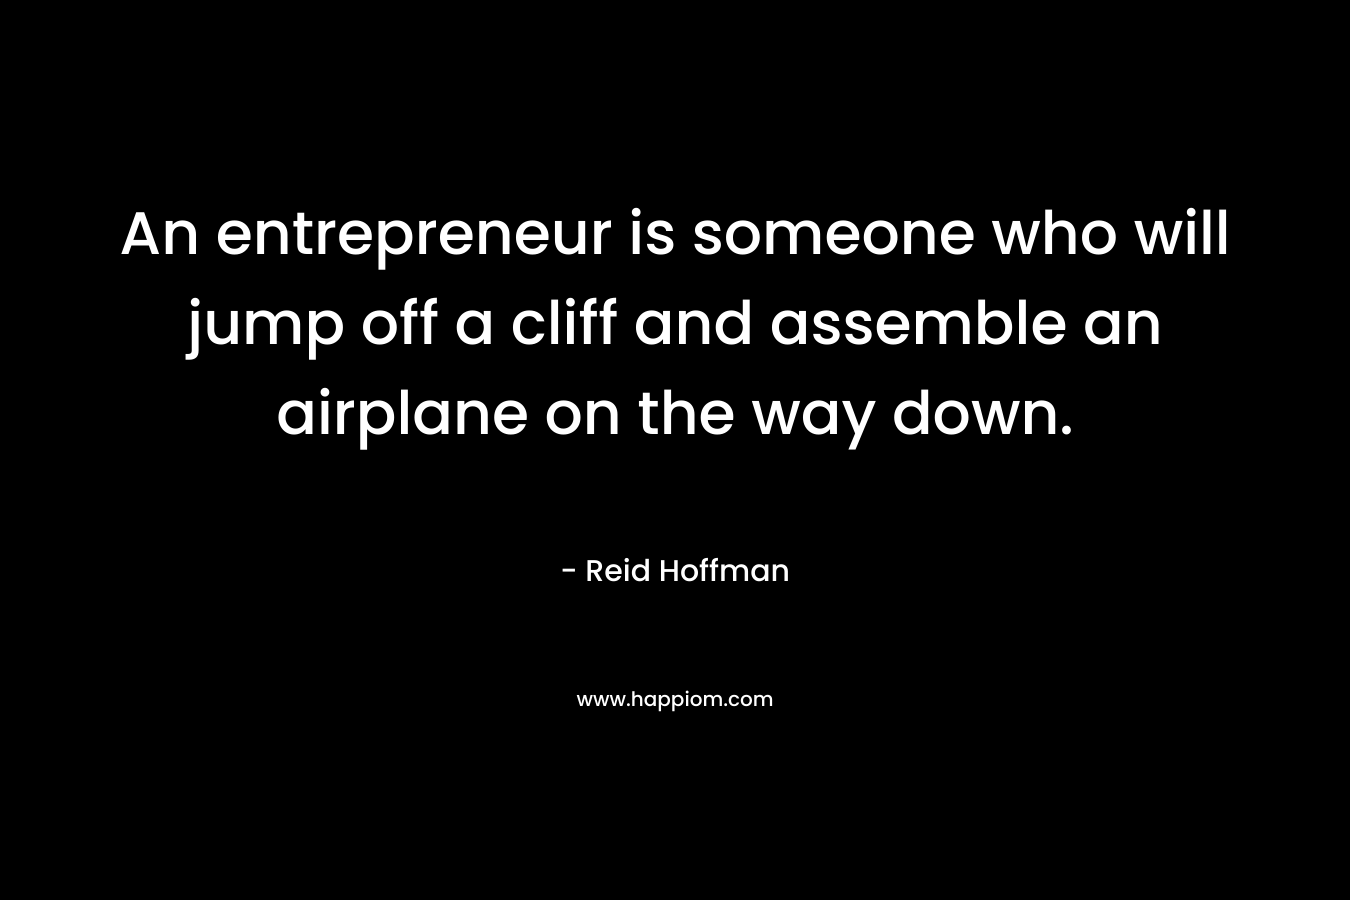 An entrepreneur is someone who will jump off a cliff and assemble an airplane on the way down. – Reid Hoffman